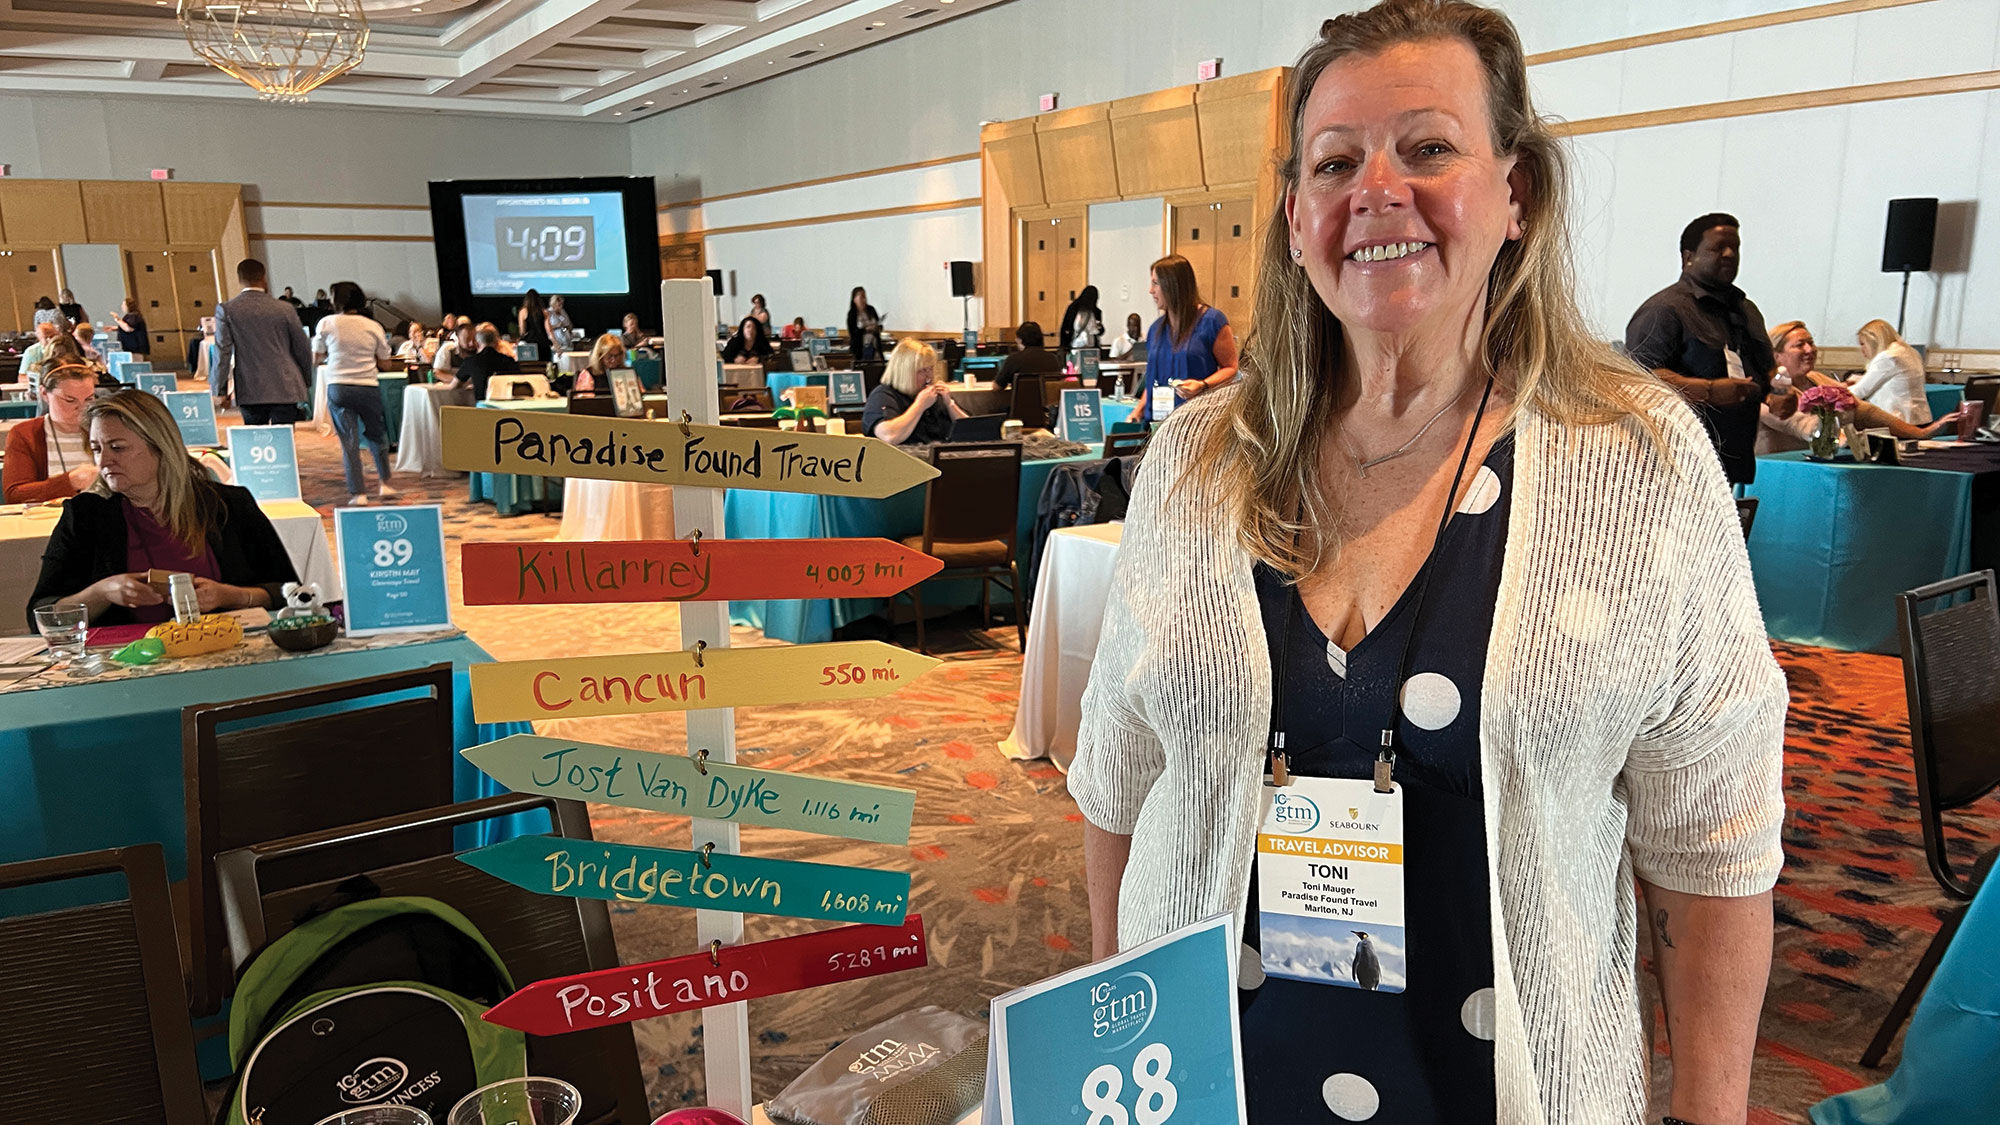 Toni Mauger of Paradise Found Travel in Marlton, N.J., at her table. Her signpost represents some of her favorite destinations, but she has a special place in her heart for Jost Van Dyke in the British Virgin Islands.